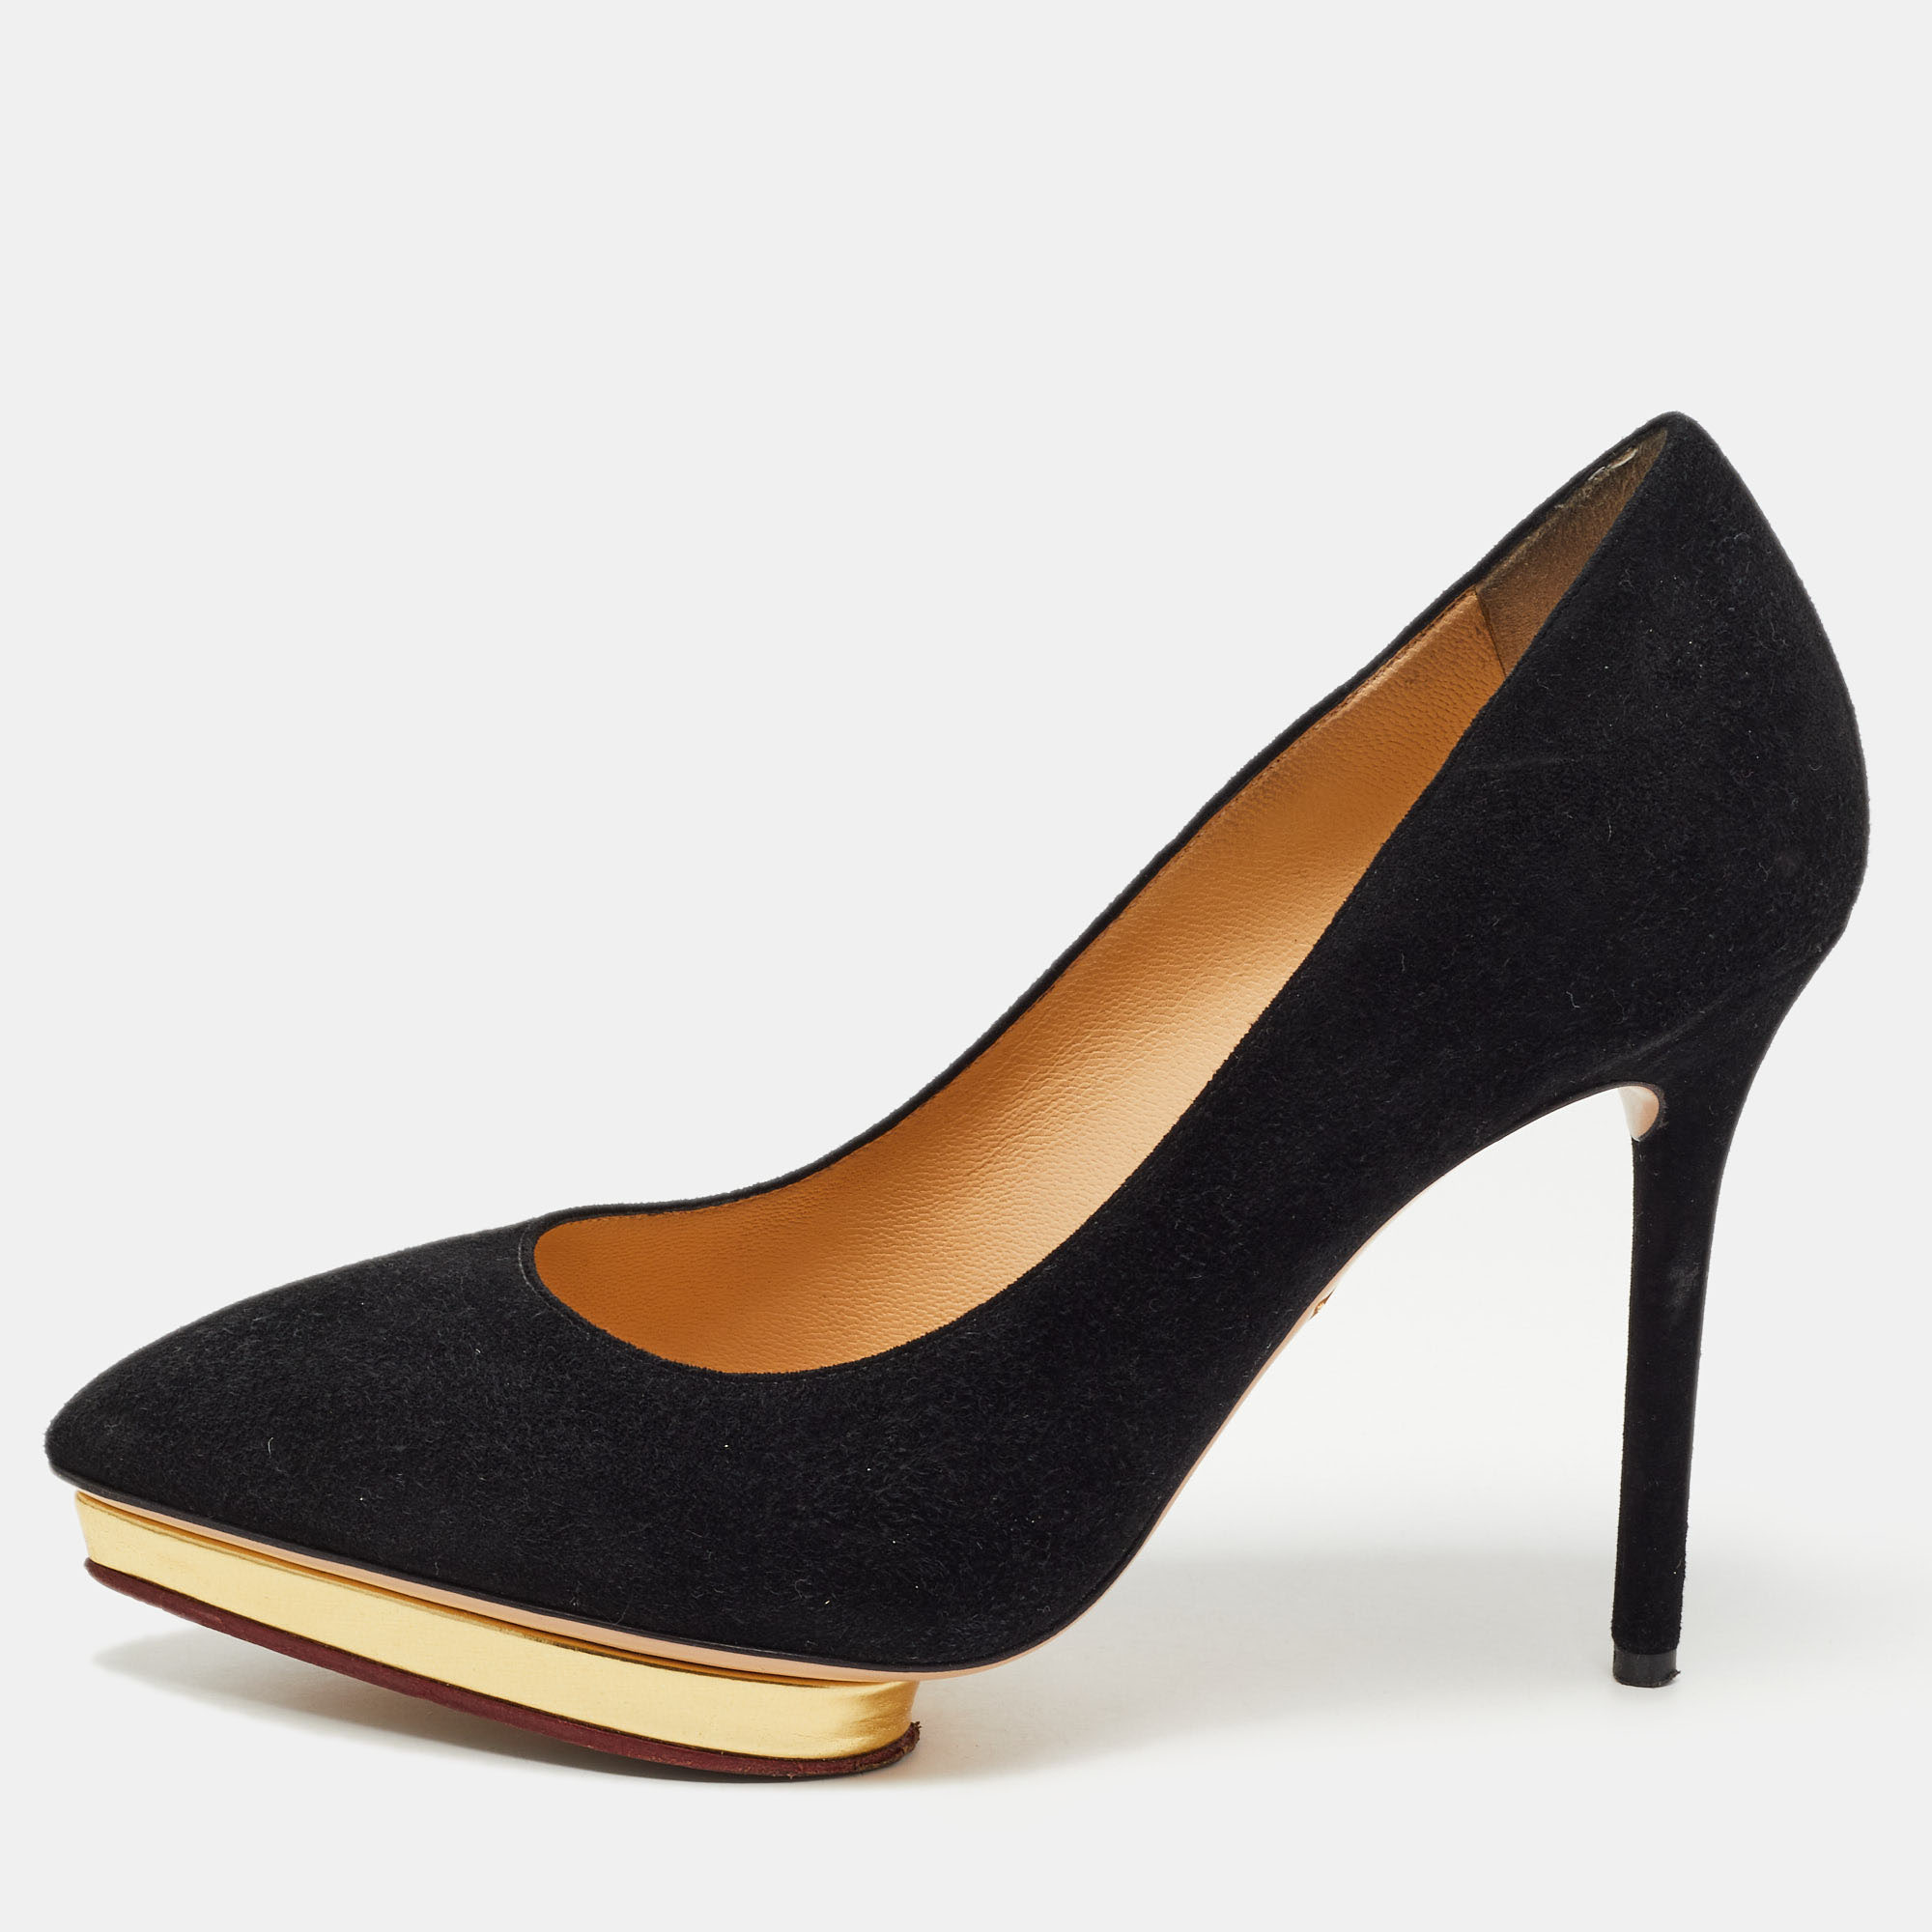 Bring home these Charlotte Olympia pumps today and get set to enjoy dazzling day outs Crafted out of suede in a classy black shade and lined with leather on the insoles this number is from their Dotty collection. Theyve been beautified with stiletto heels and gold toned platforms.